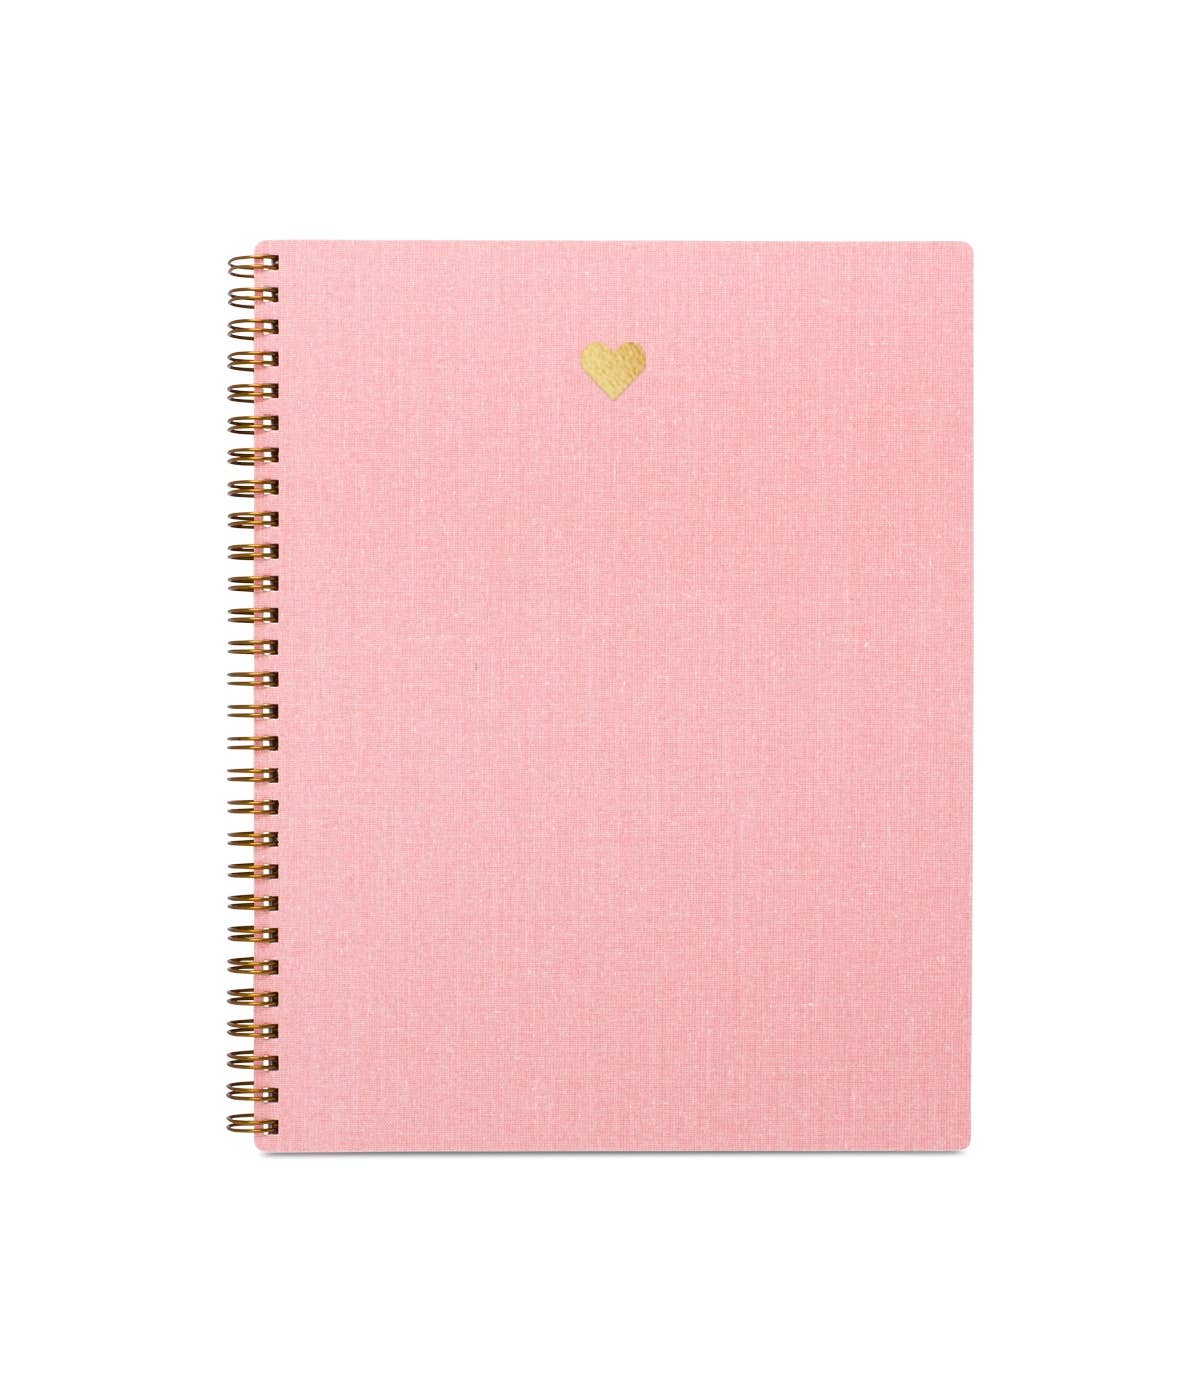 Blossom Pink Heart Notebook Lined